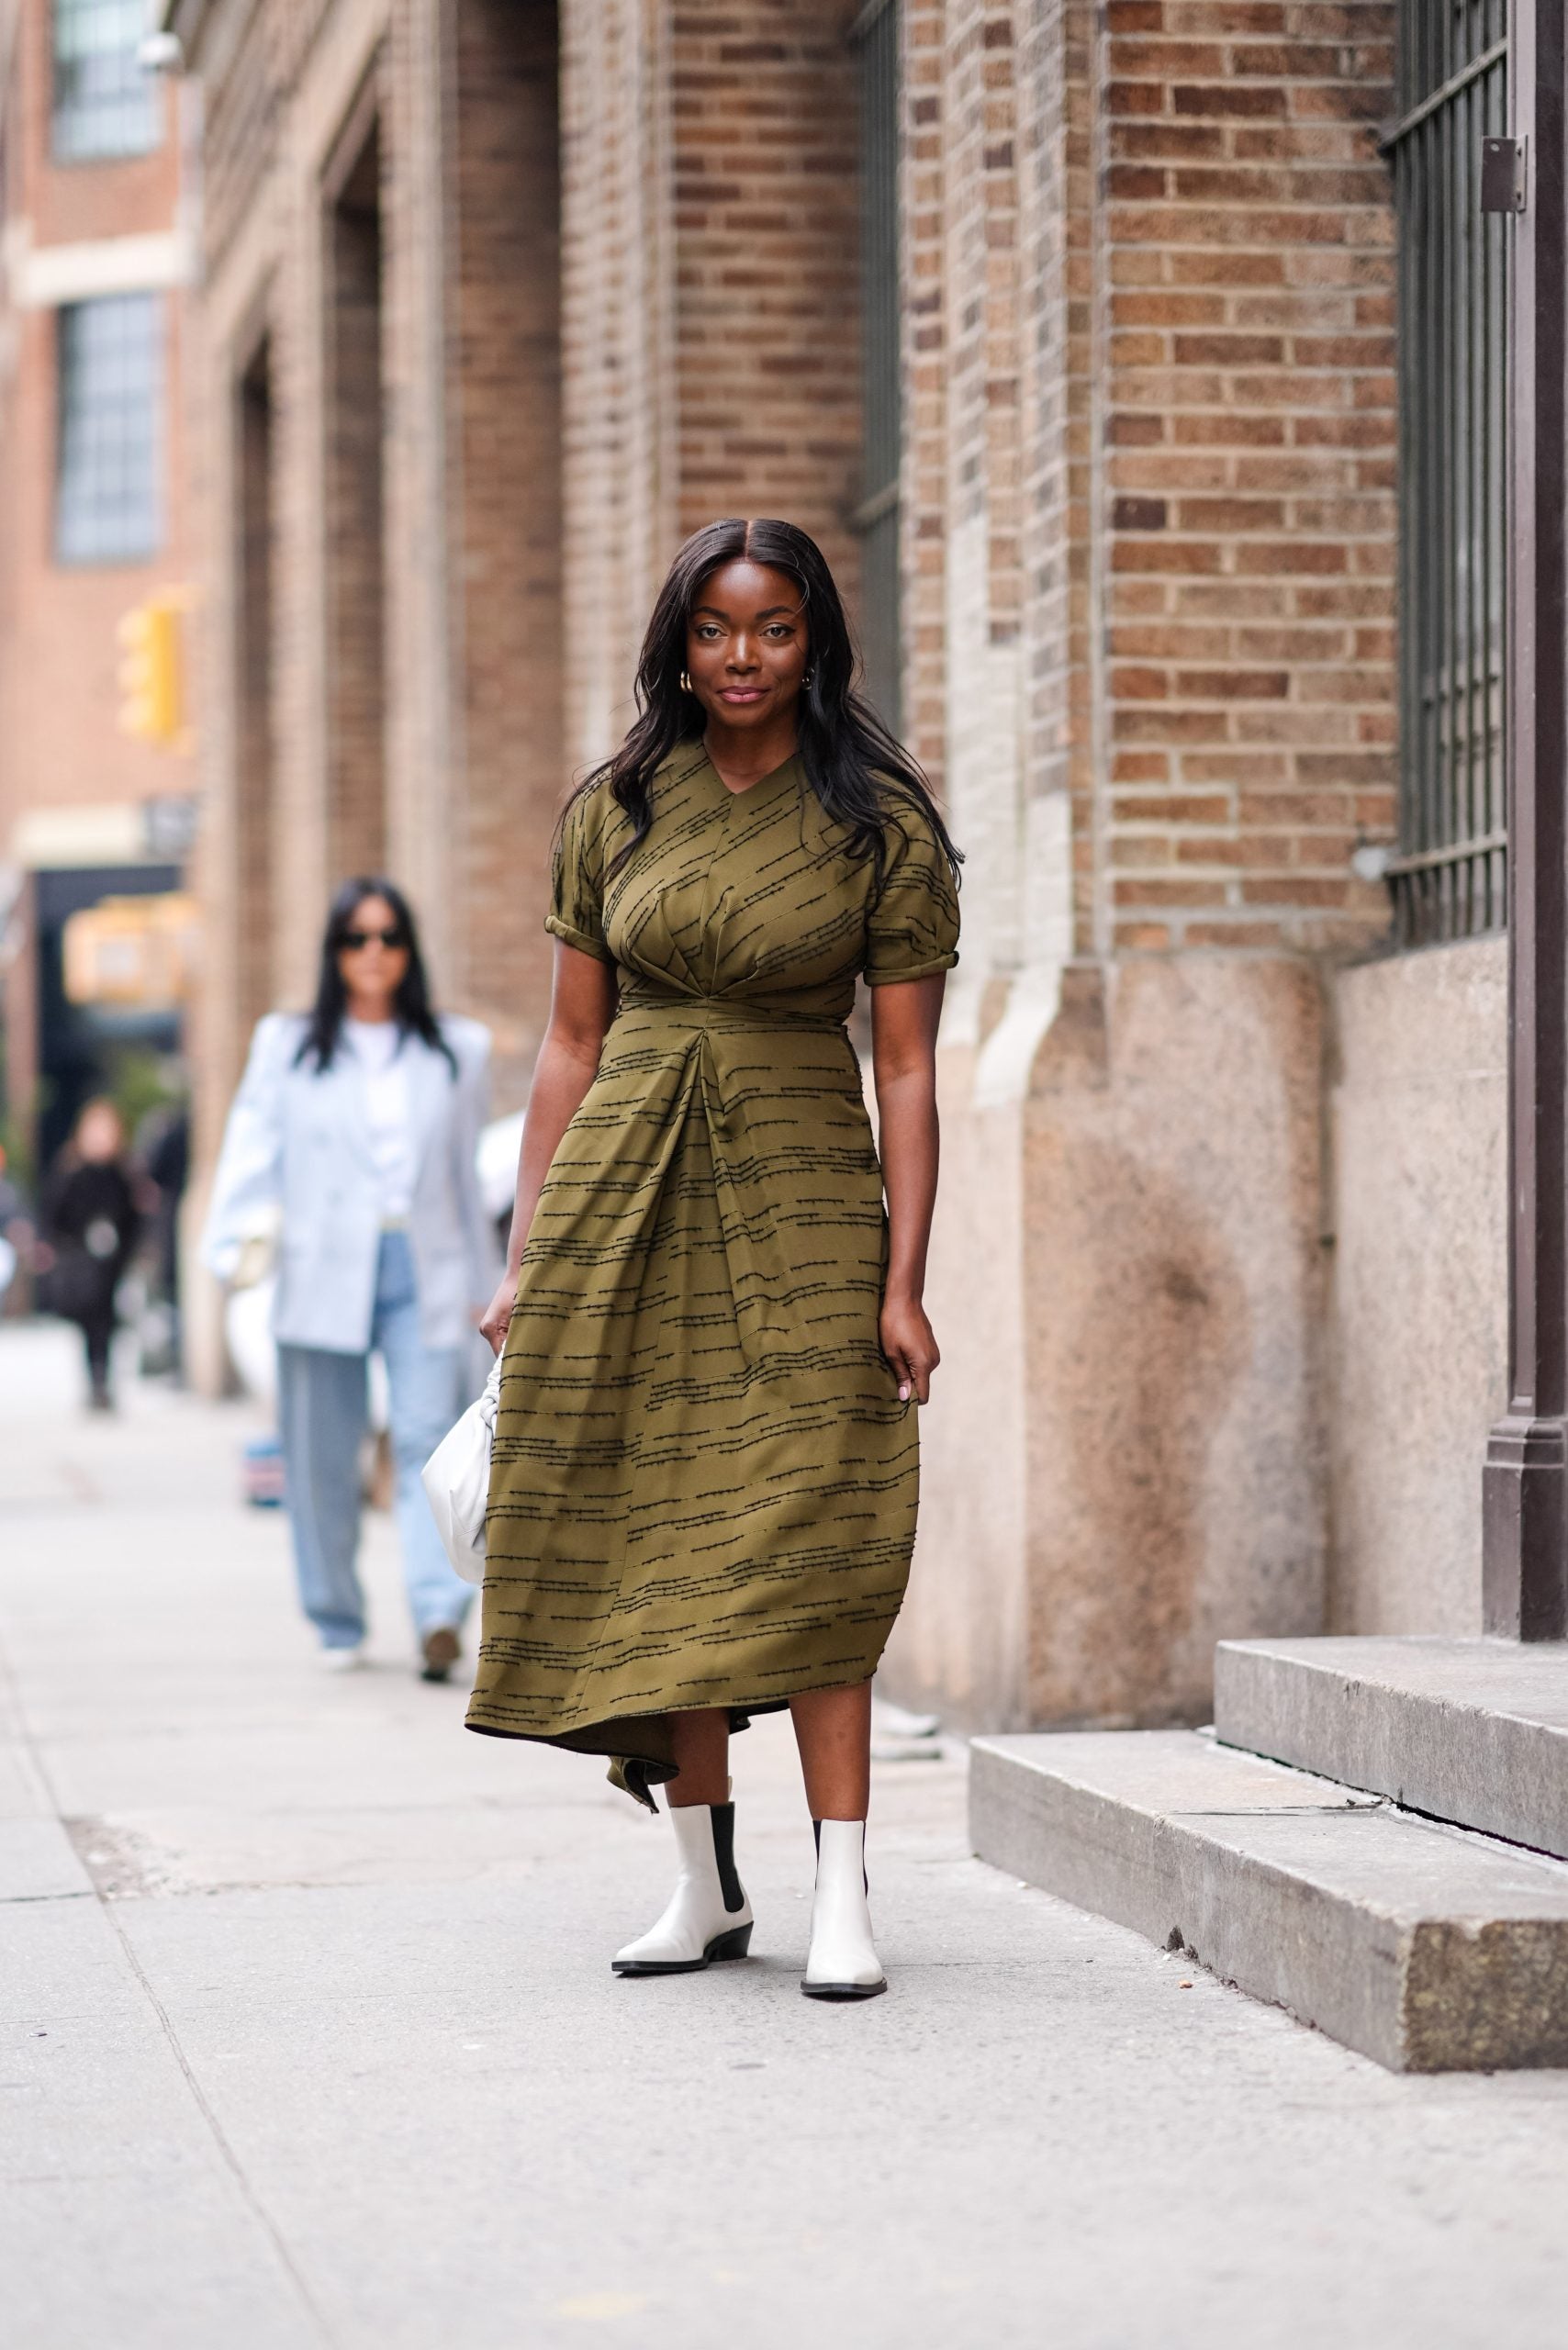 5 Timeless Outfits For Working Women Of All Ages